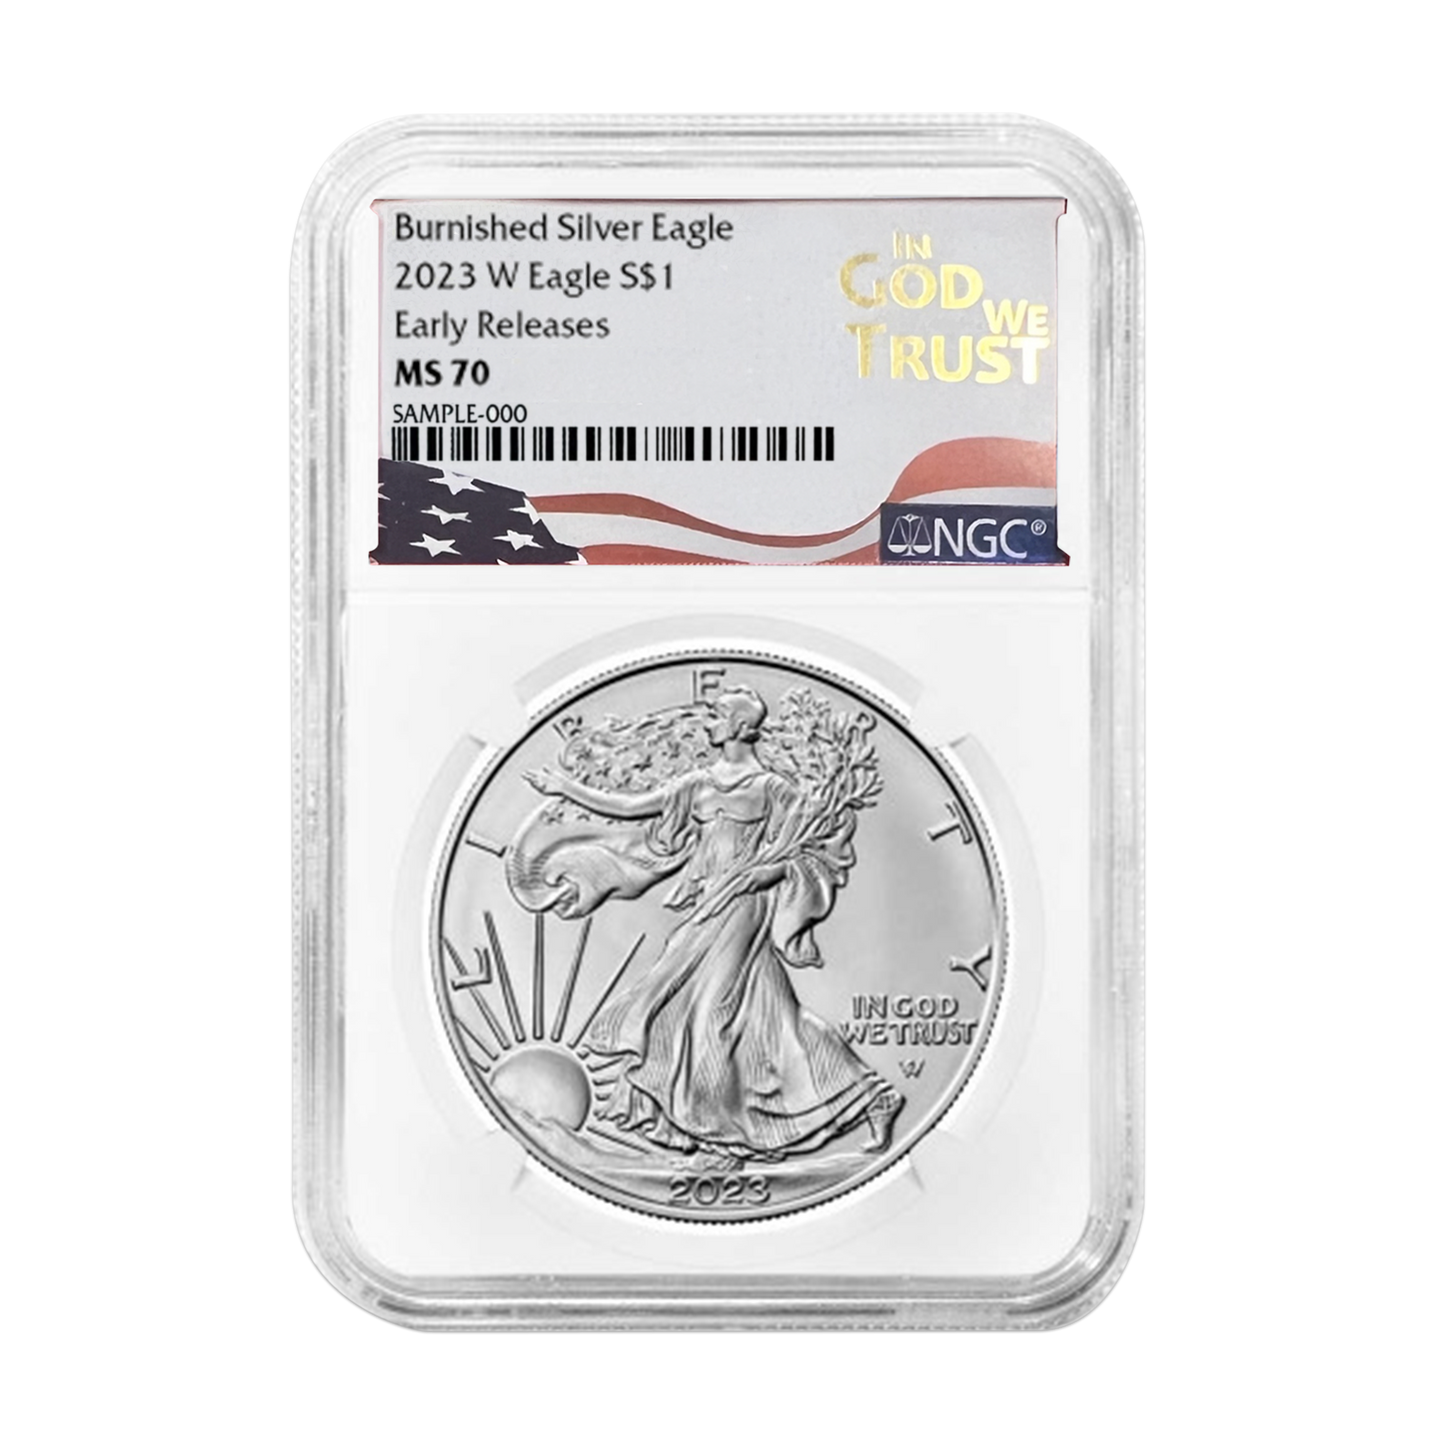 2023 W Silver Eagle Burnished - NGC MS70 Early Release In God We Trust Label